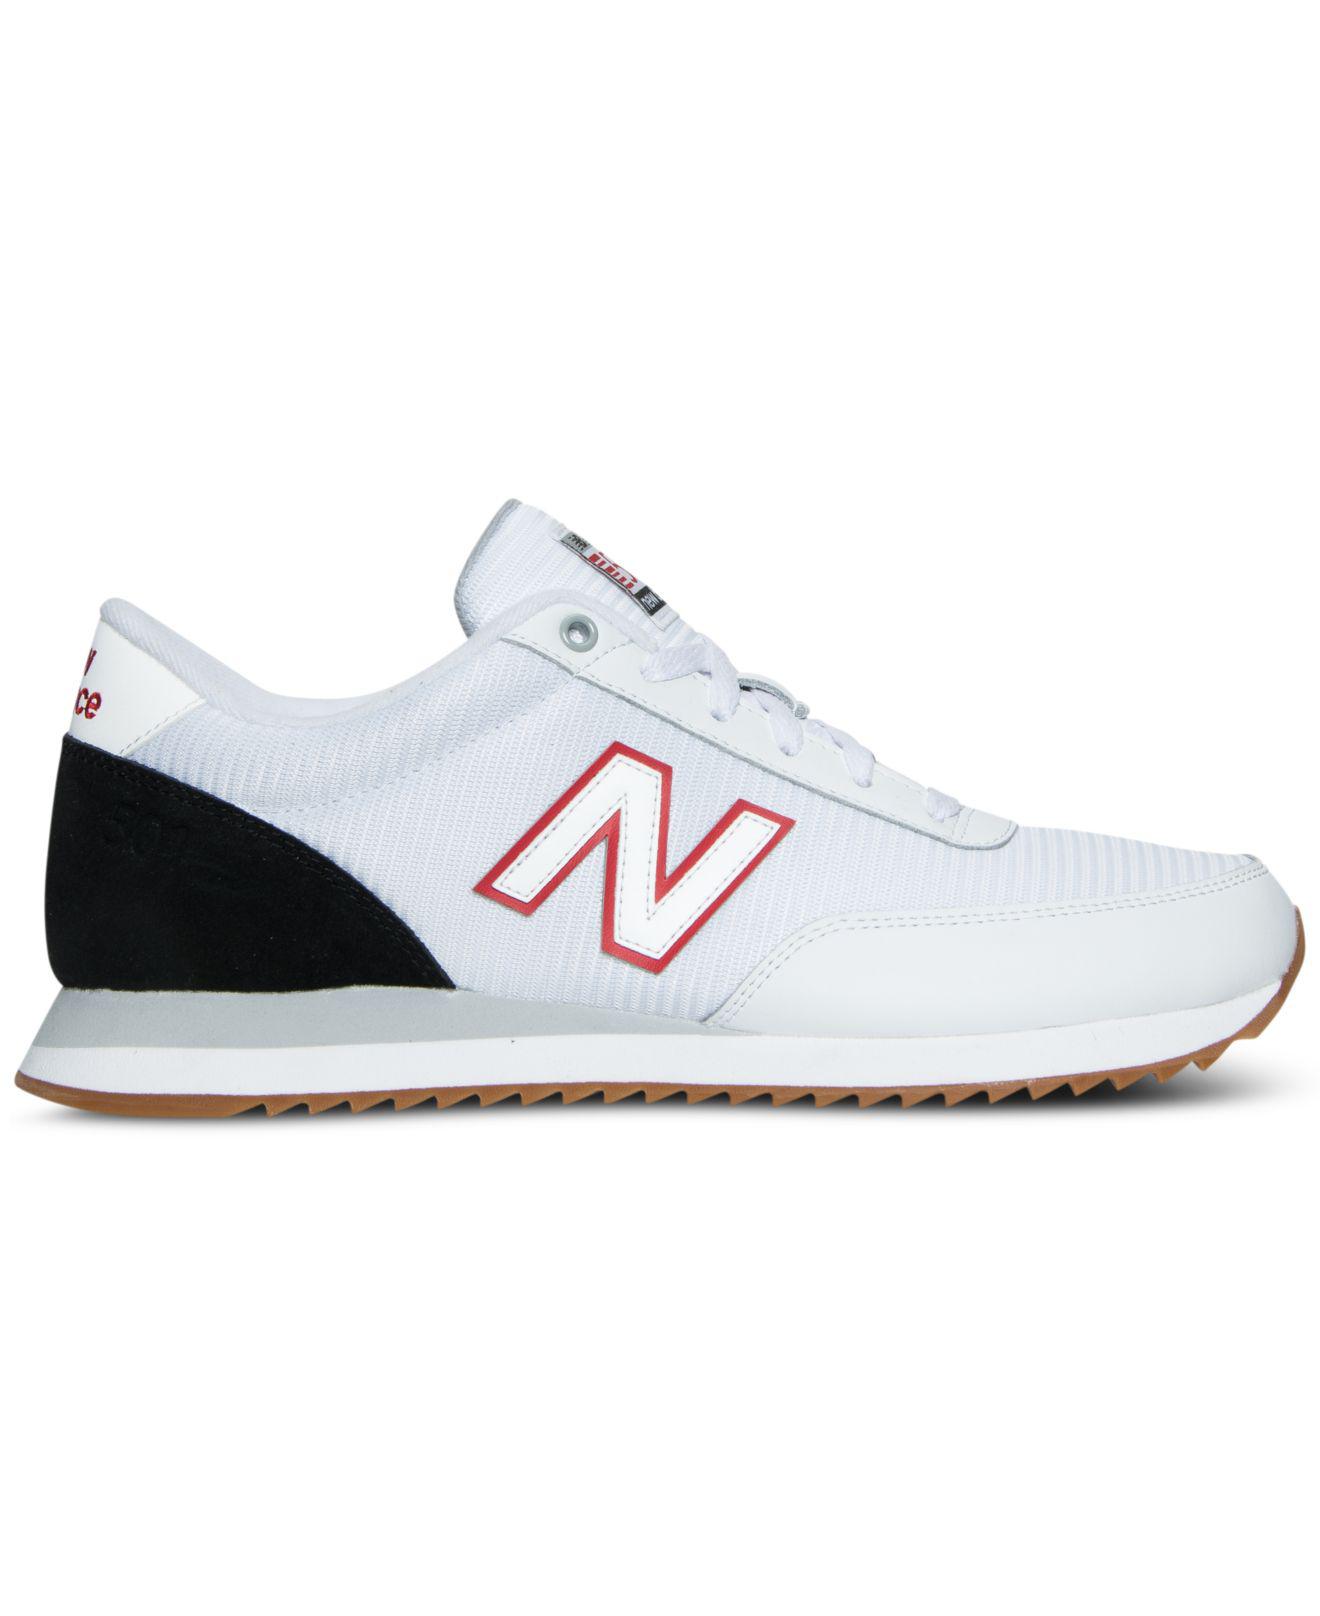 New Balance Suede Men's 501 Gum Ripple Casual Sneakers From Finish Line in  White/Black/Red (White) for Men - Lyst